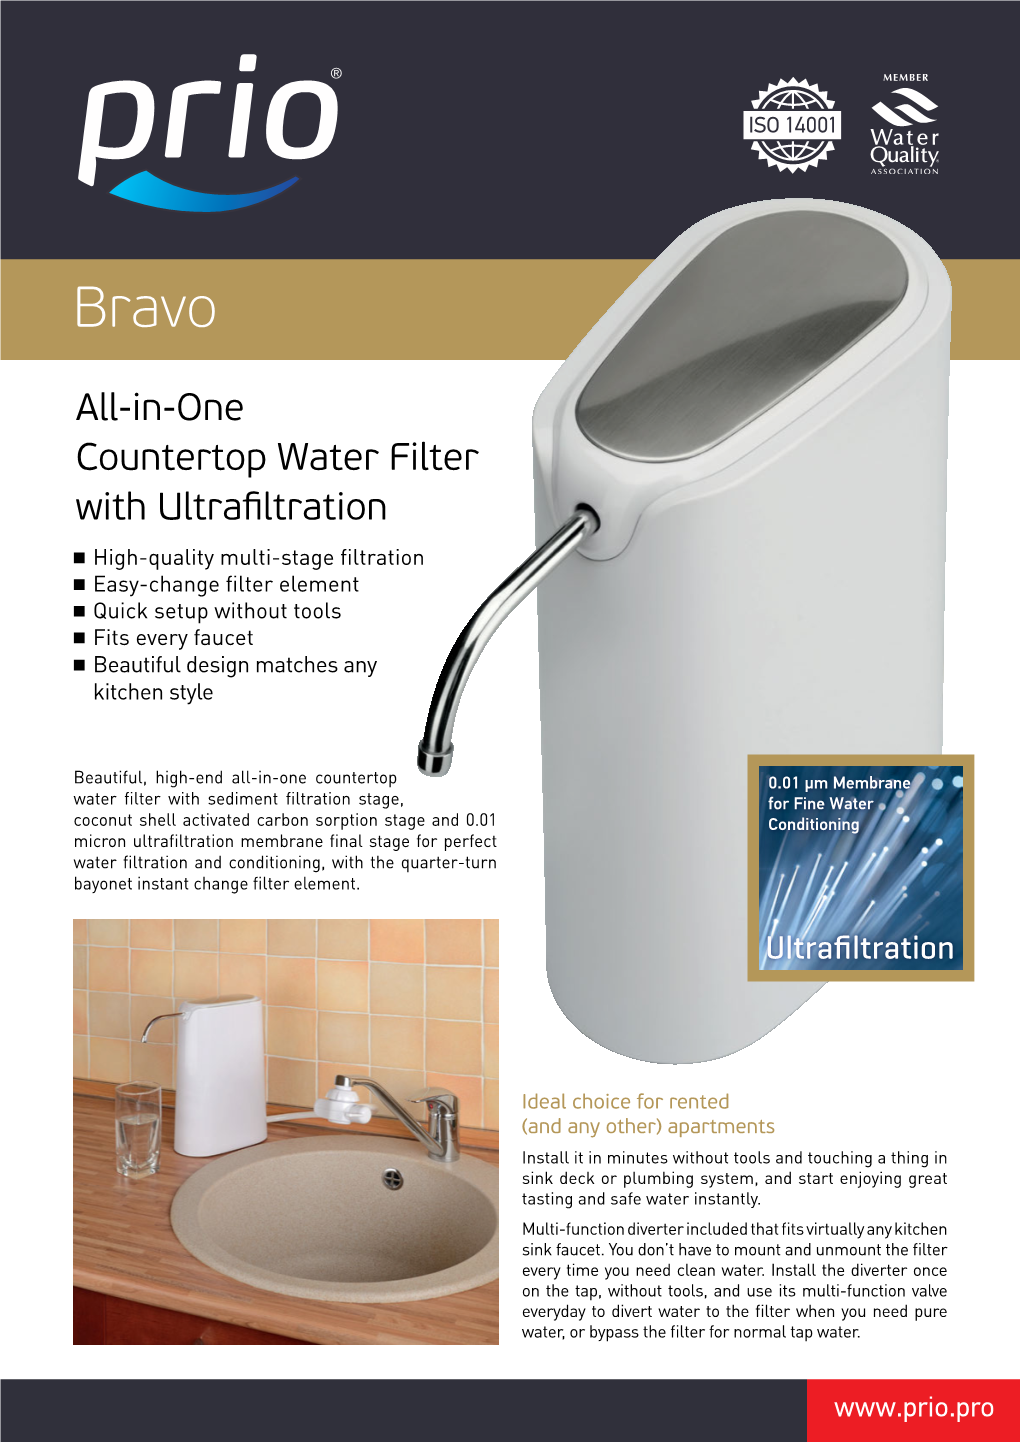 All-In-One Countertop Water Filter with Ultrafiltration